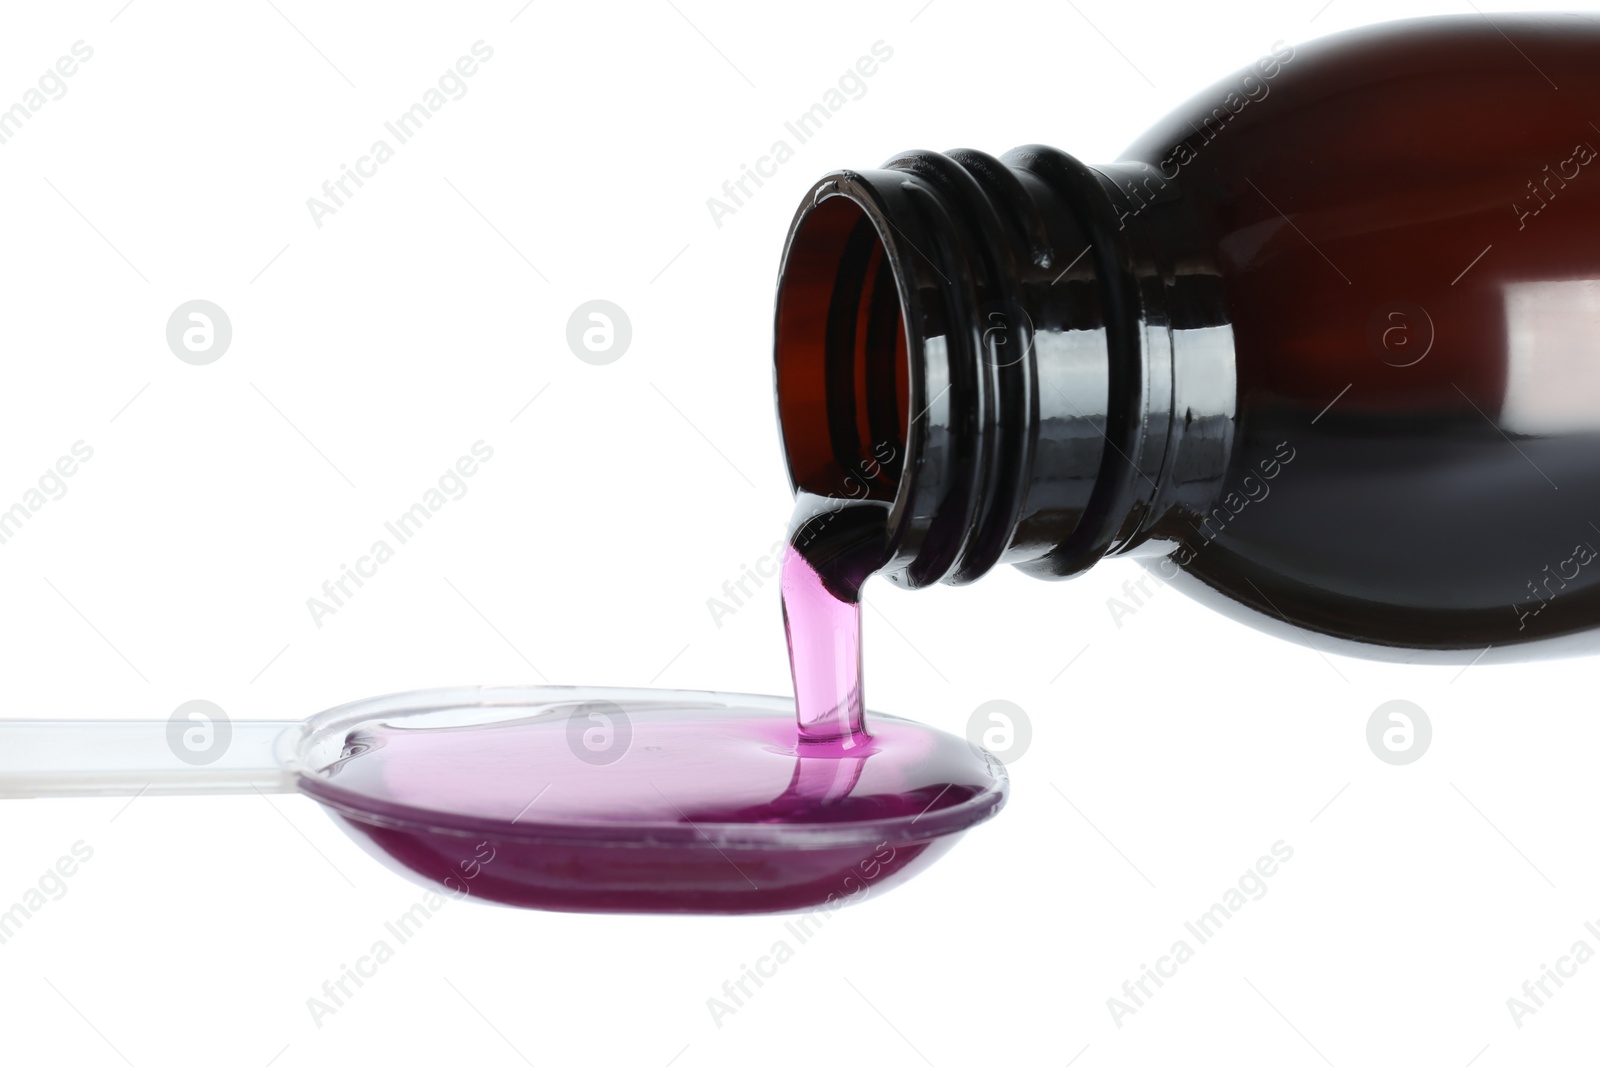 Photo of Pouring cough syrup into dosing spoon on white background